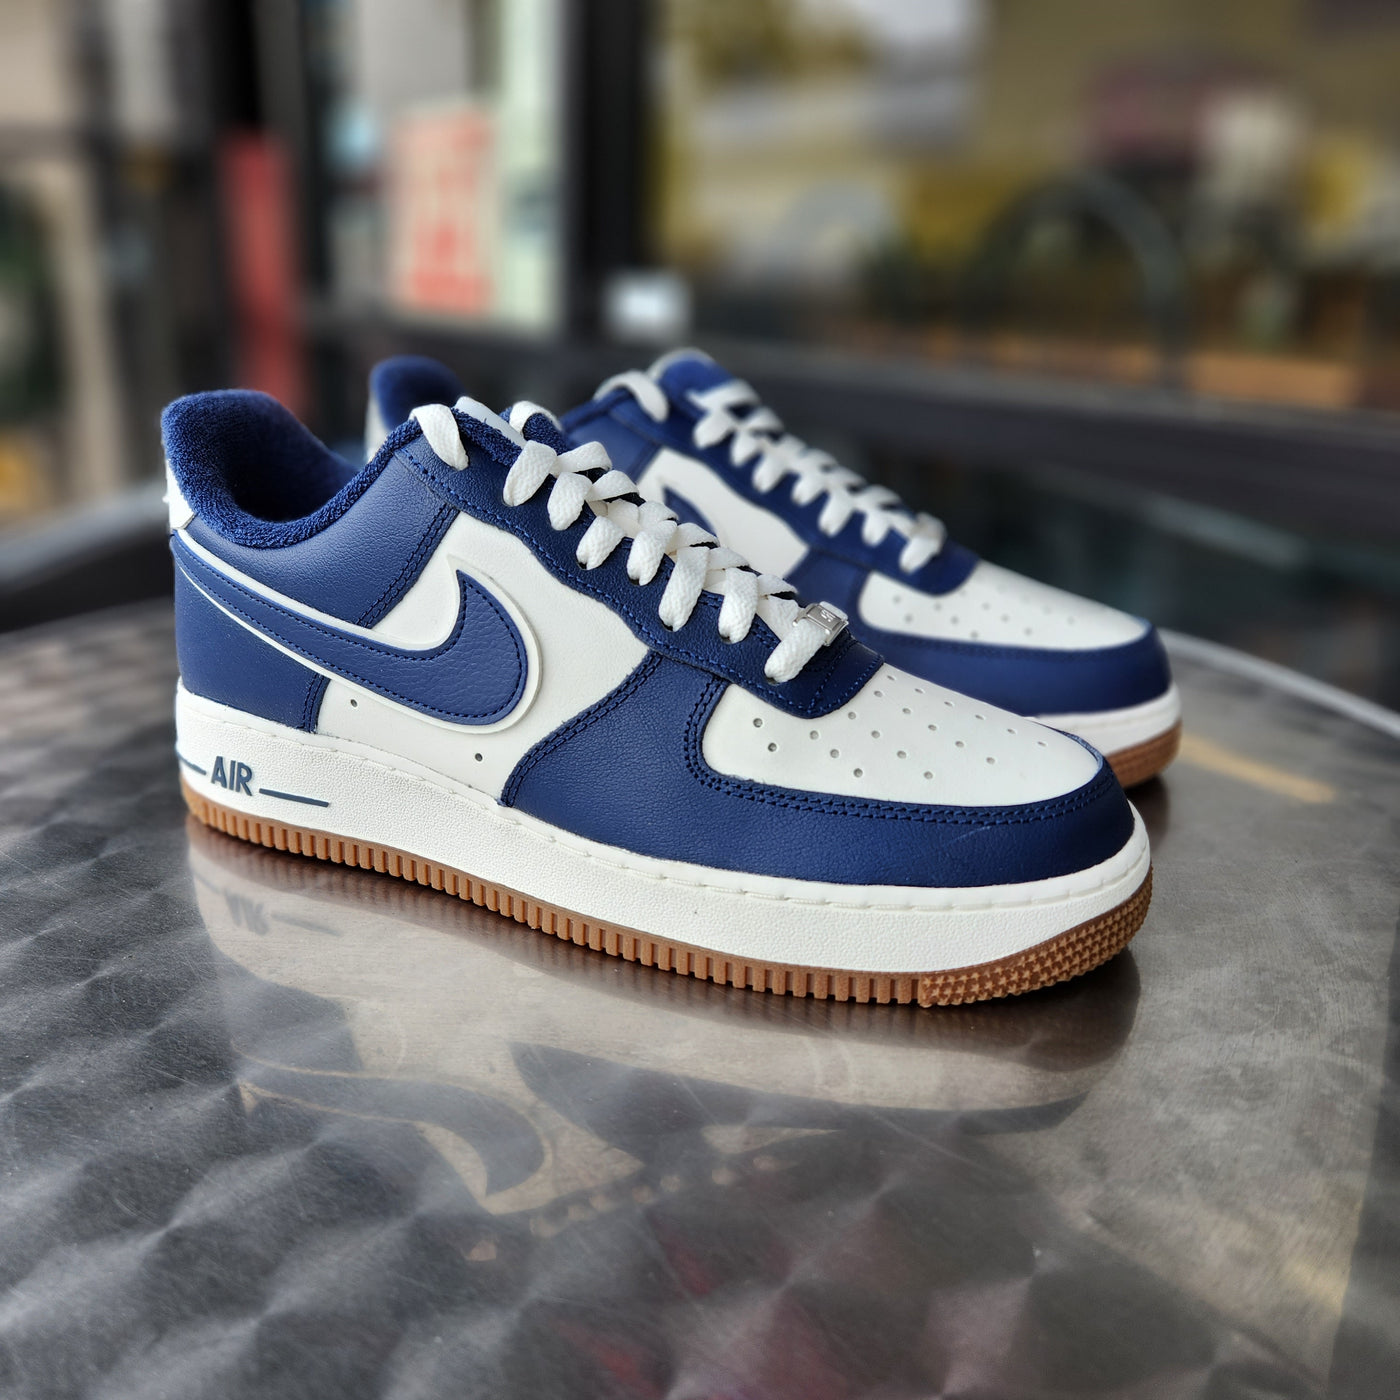 Nike Air Force 1 '07 LV8 'Midnight Navy' | Blue | Men's Size 11.5